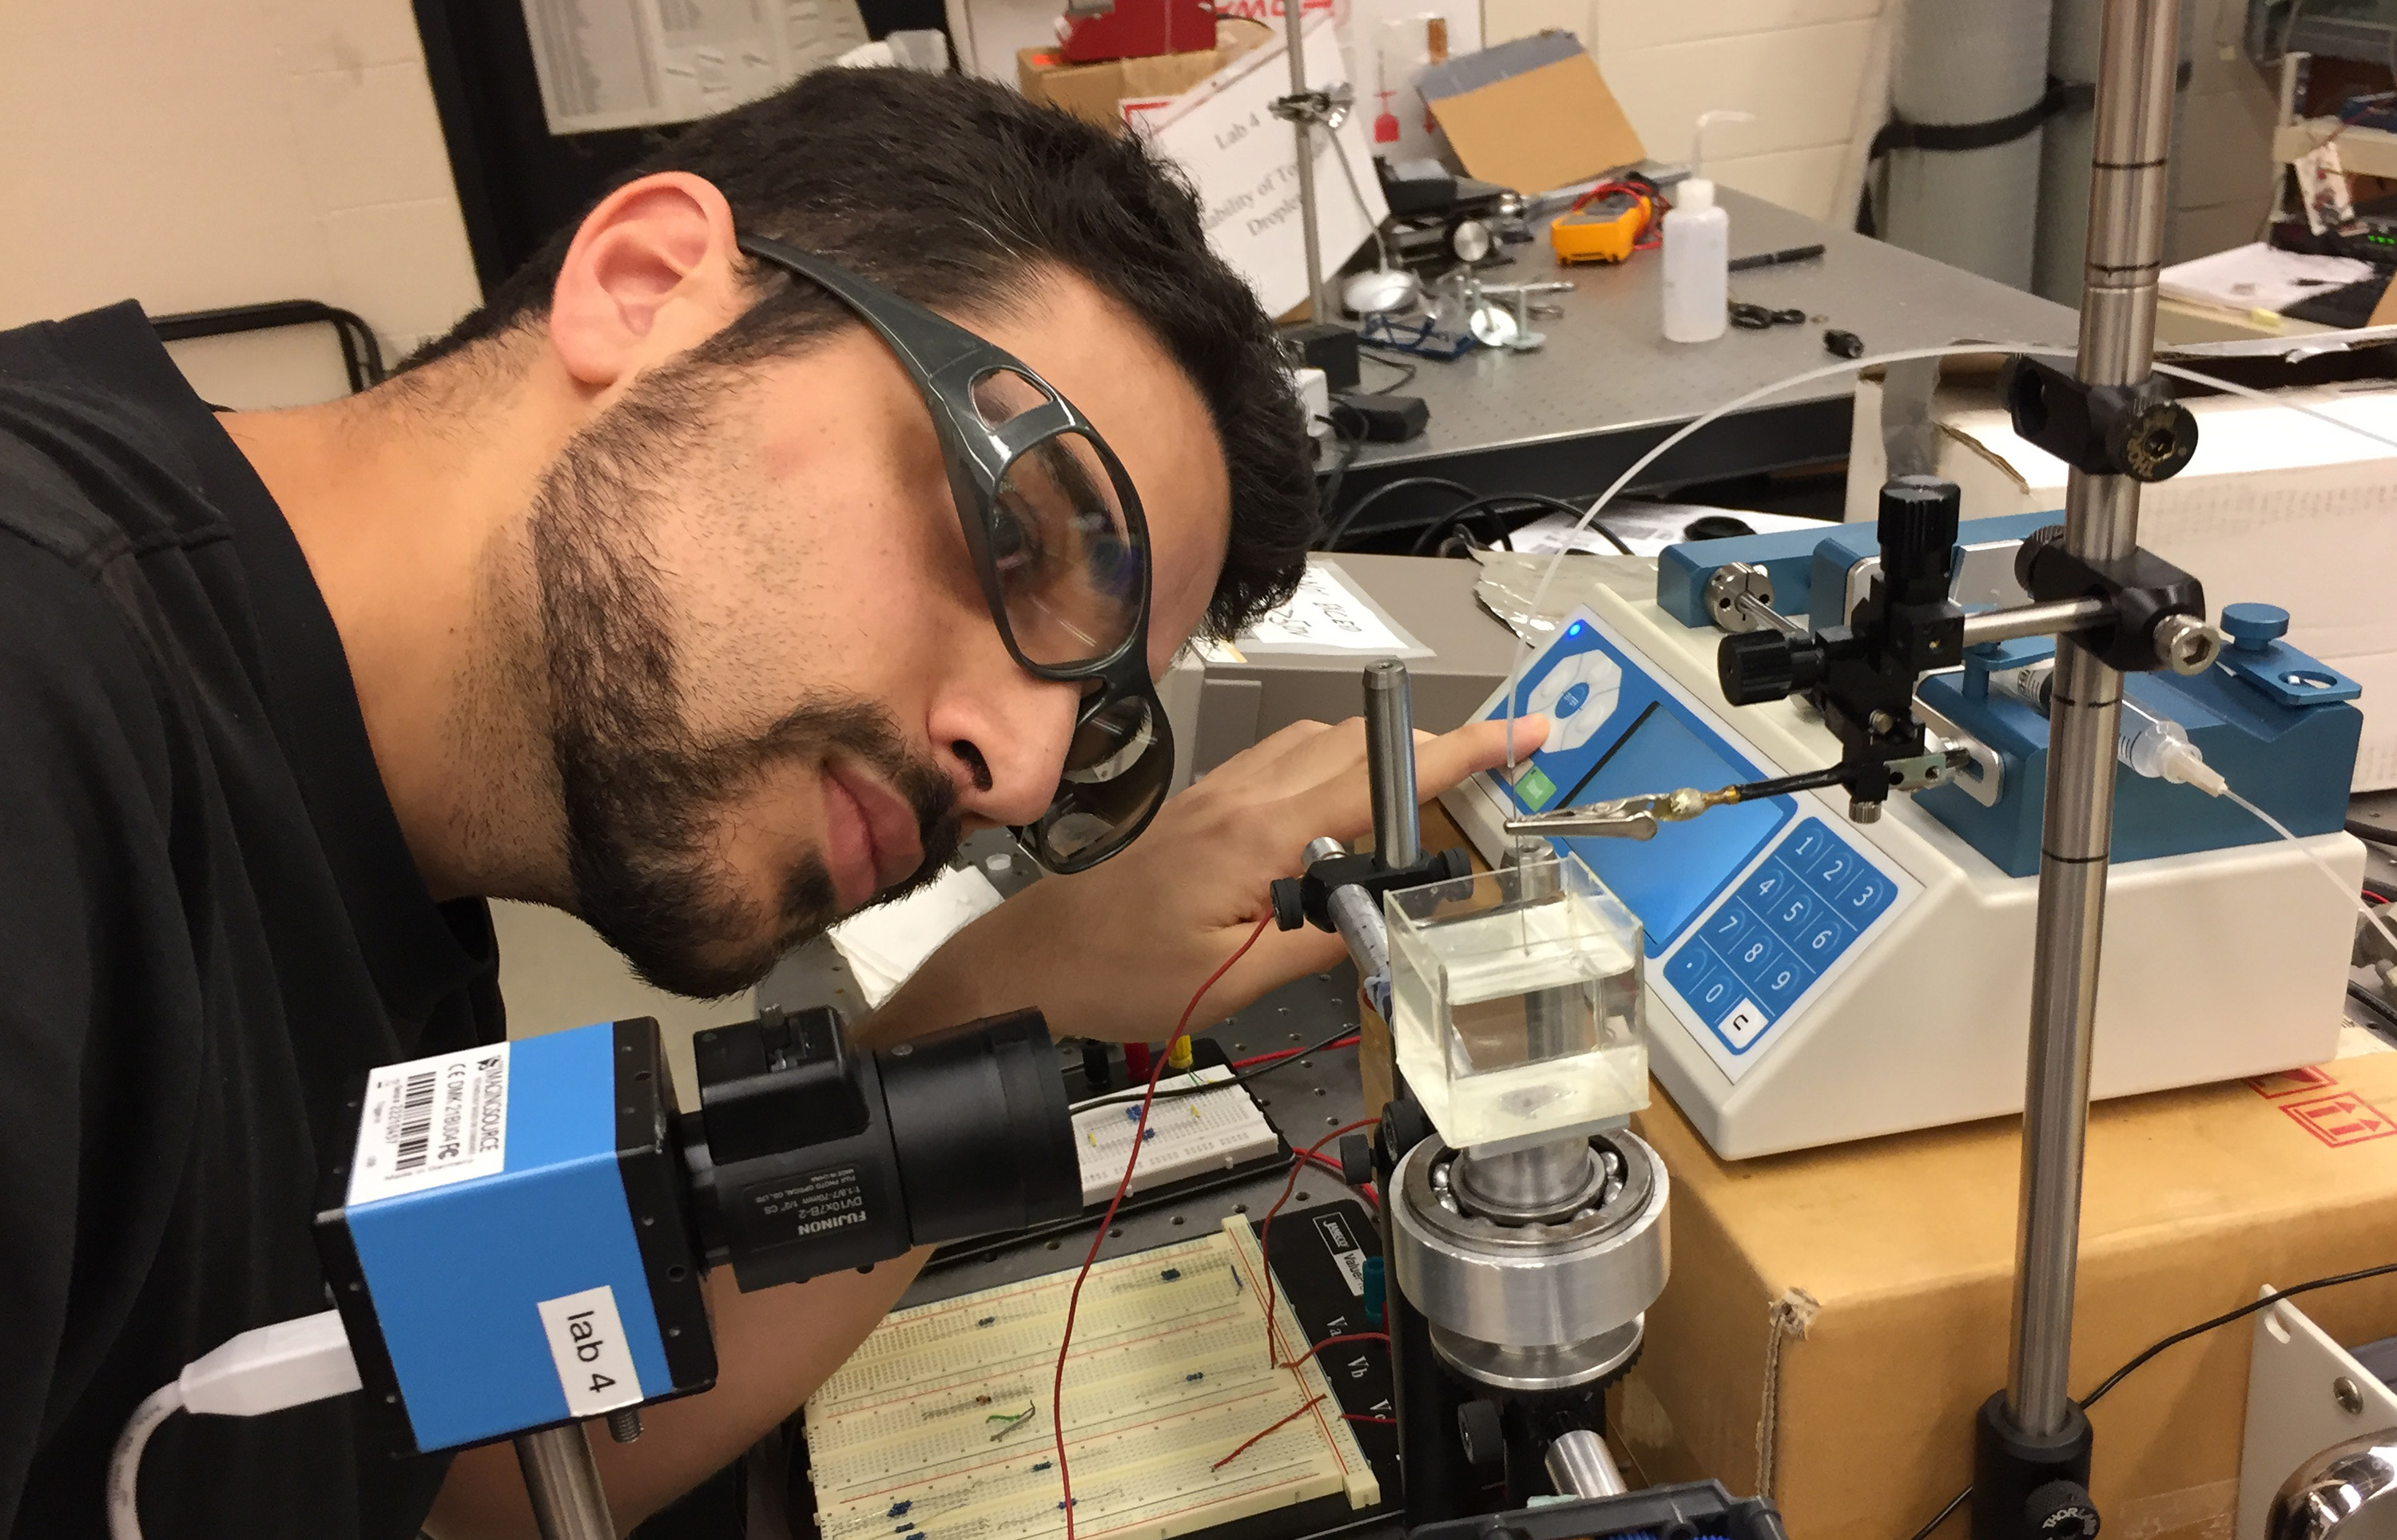 Georgia Tech Ph.D. candidate Alexandros Fragkopoulos adjusts equipment used to create unstable toroidal droplets in viscous silicone oil. The droplets are part of a study to understand how the droplets evolve into spherical forms. (Credit: John Toon, Georgia Tech)